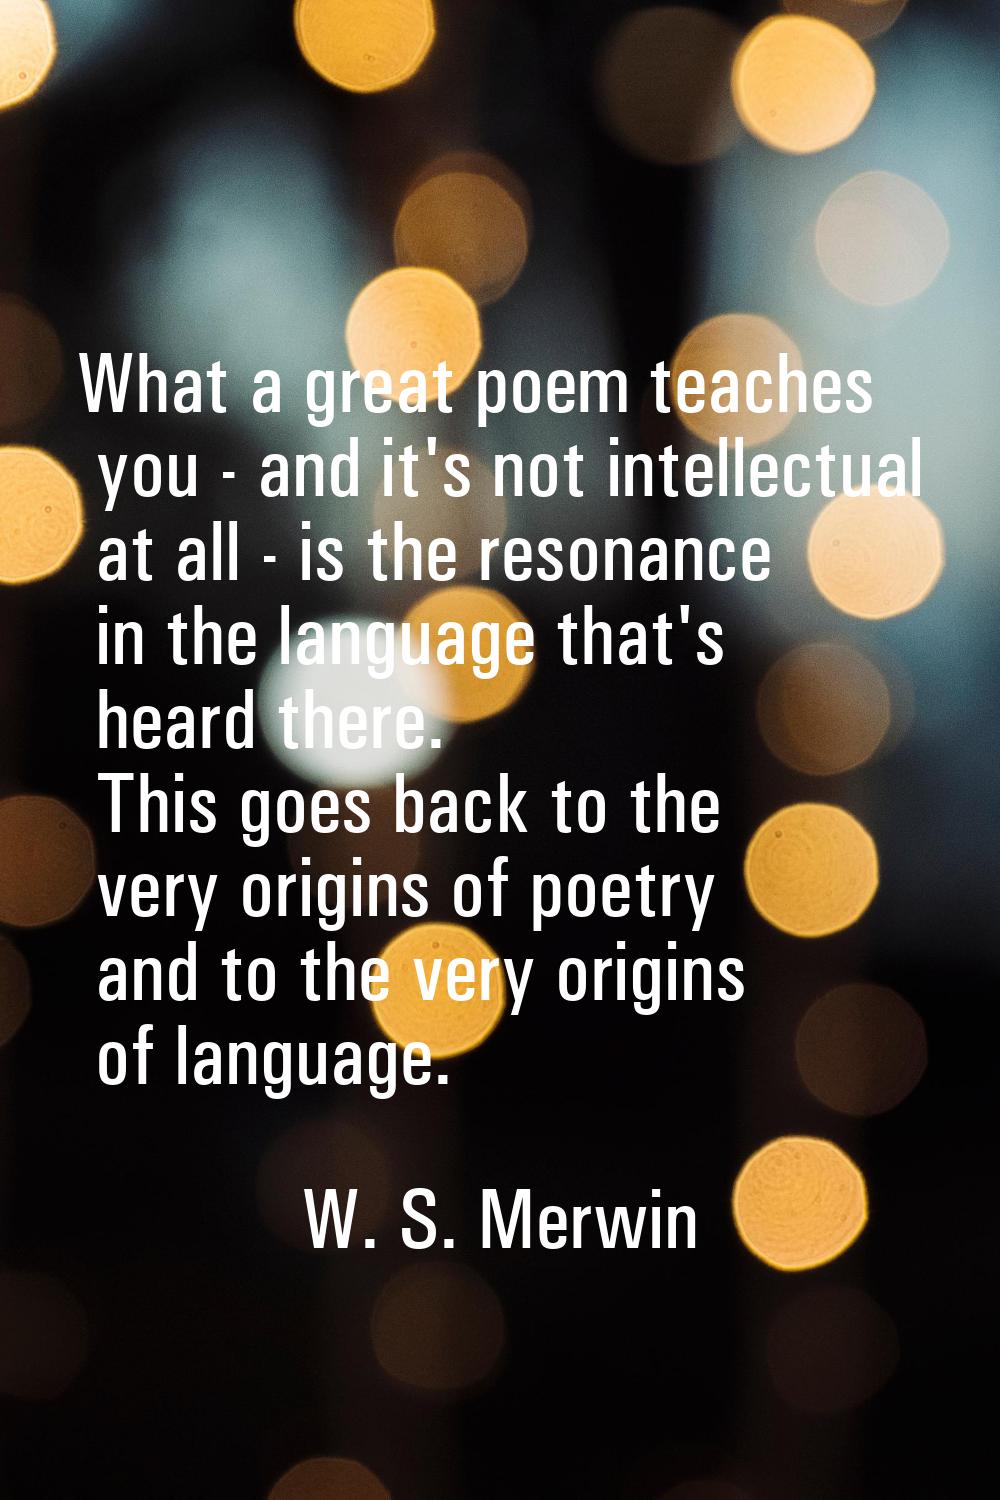 What a great poem teaches you - and it's not intellectual at all - is the resonance in the language